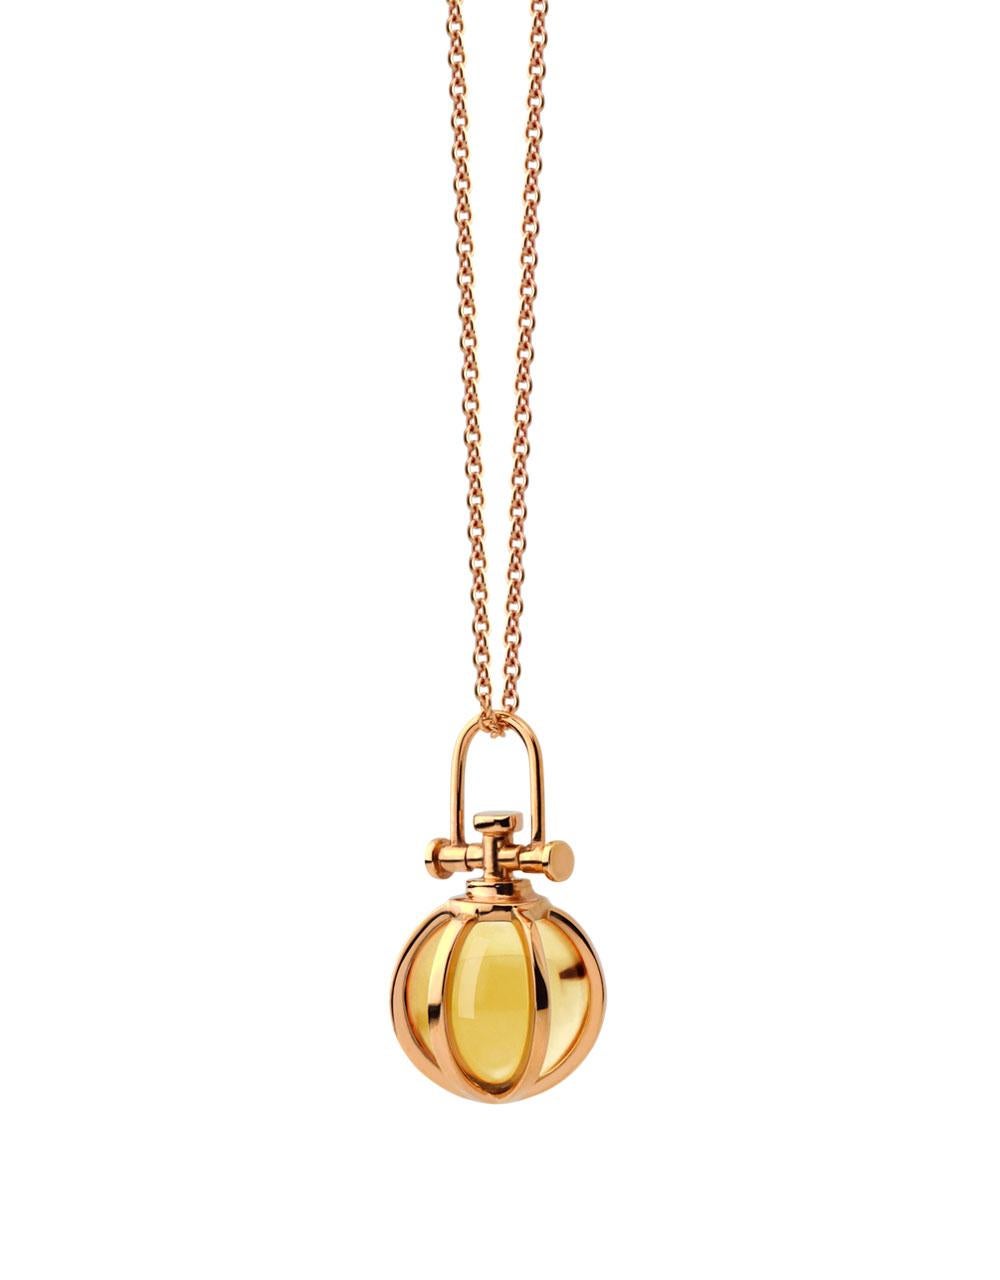 Rebecca Li designs mindfulness. 
This dainty orb necklace is from her Crystal Ball Collection.
Citrine means Wealth, Abundance & Luck

Pendant:
Metal Type: 18K Rose Gold
Gemstone: Green Amethyst
Pendant Size: 9 mm W * 9 mm D * 17 mm H
Gemstone Size: